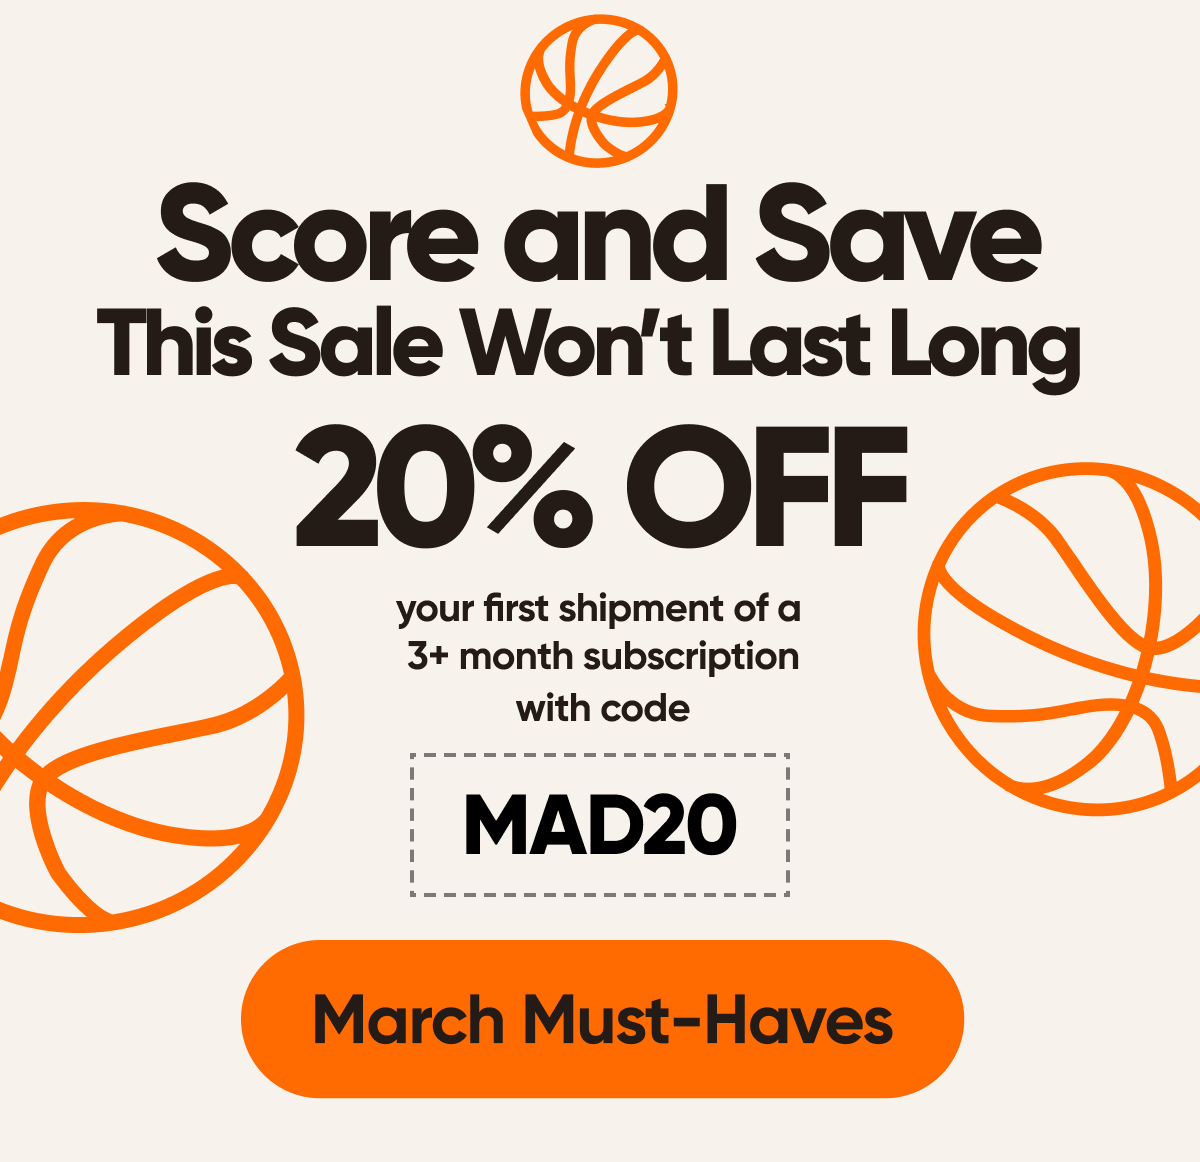 Score and Save  This Sale Wont Last Long   Celebrate the start of March with 20% off your first shipment of a 3+ month subscription with code MAD20